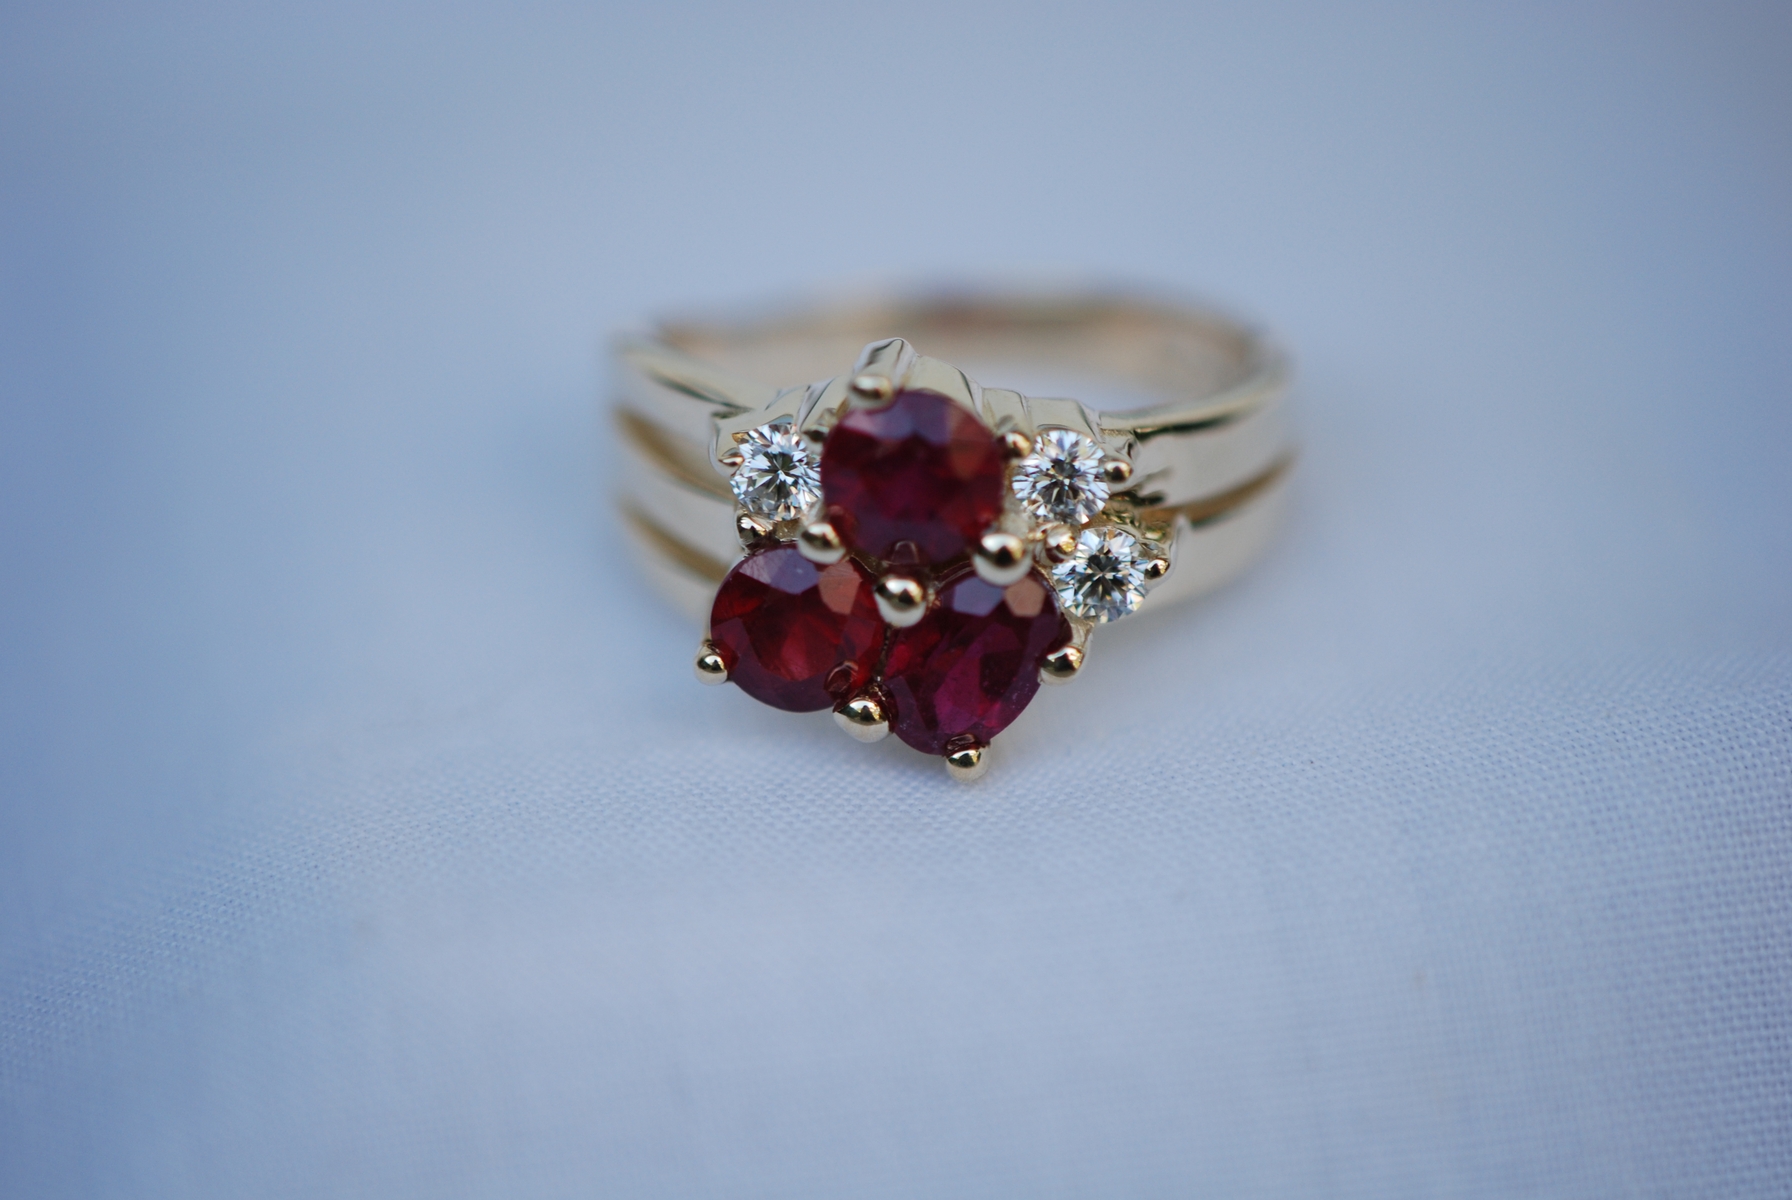 Ruby and Diamond Ring by Rohan Design at CustomMade.com